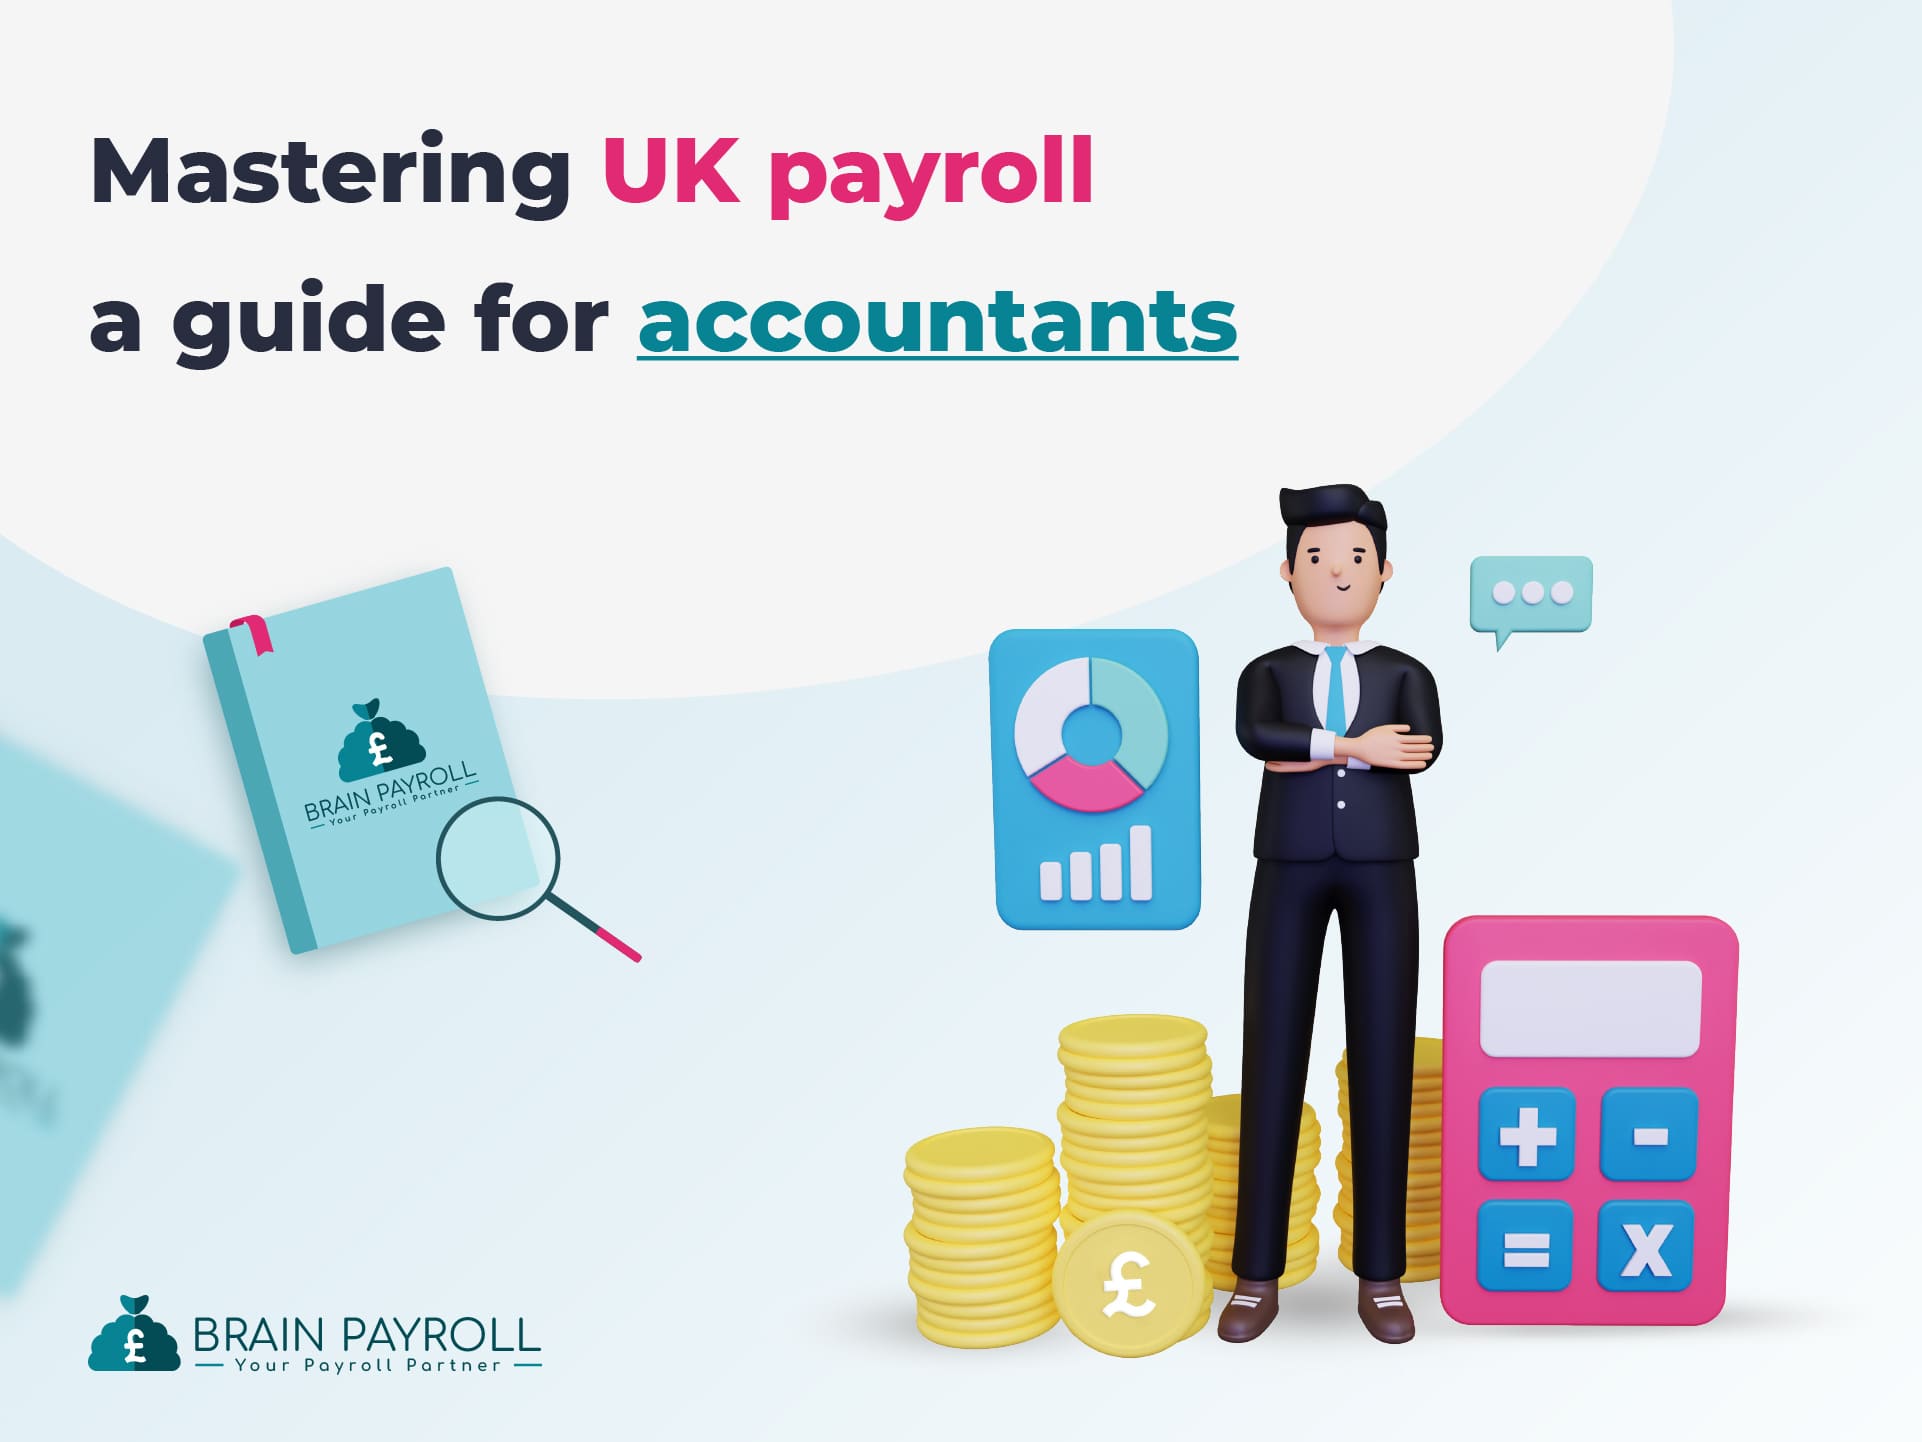 Mastering UK payroll A Guide for accountants